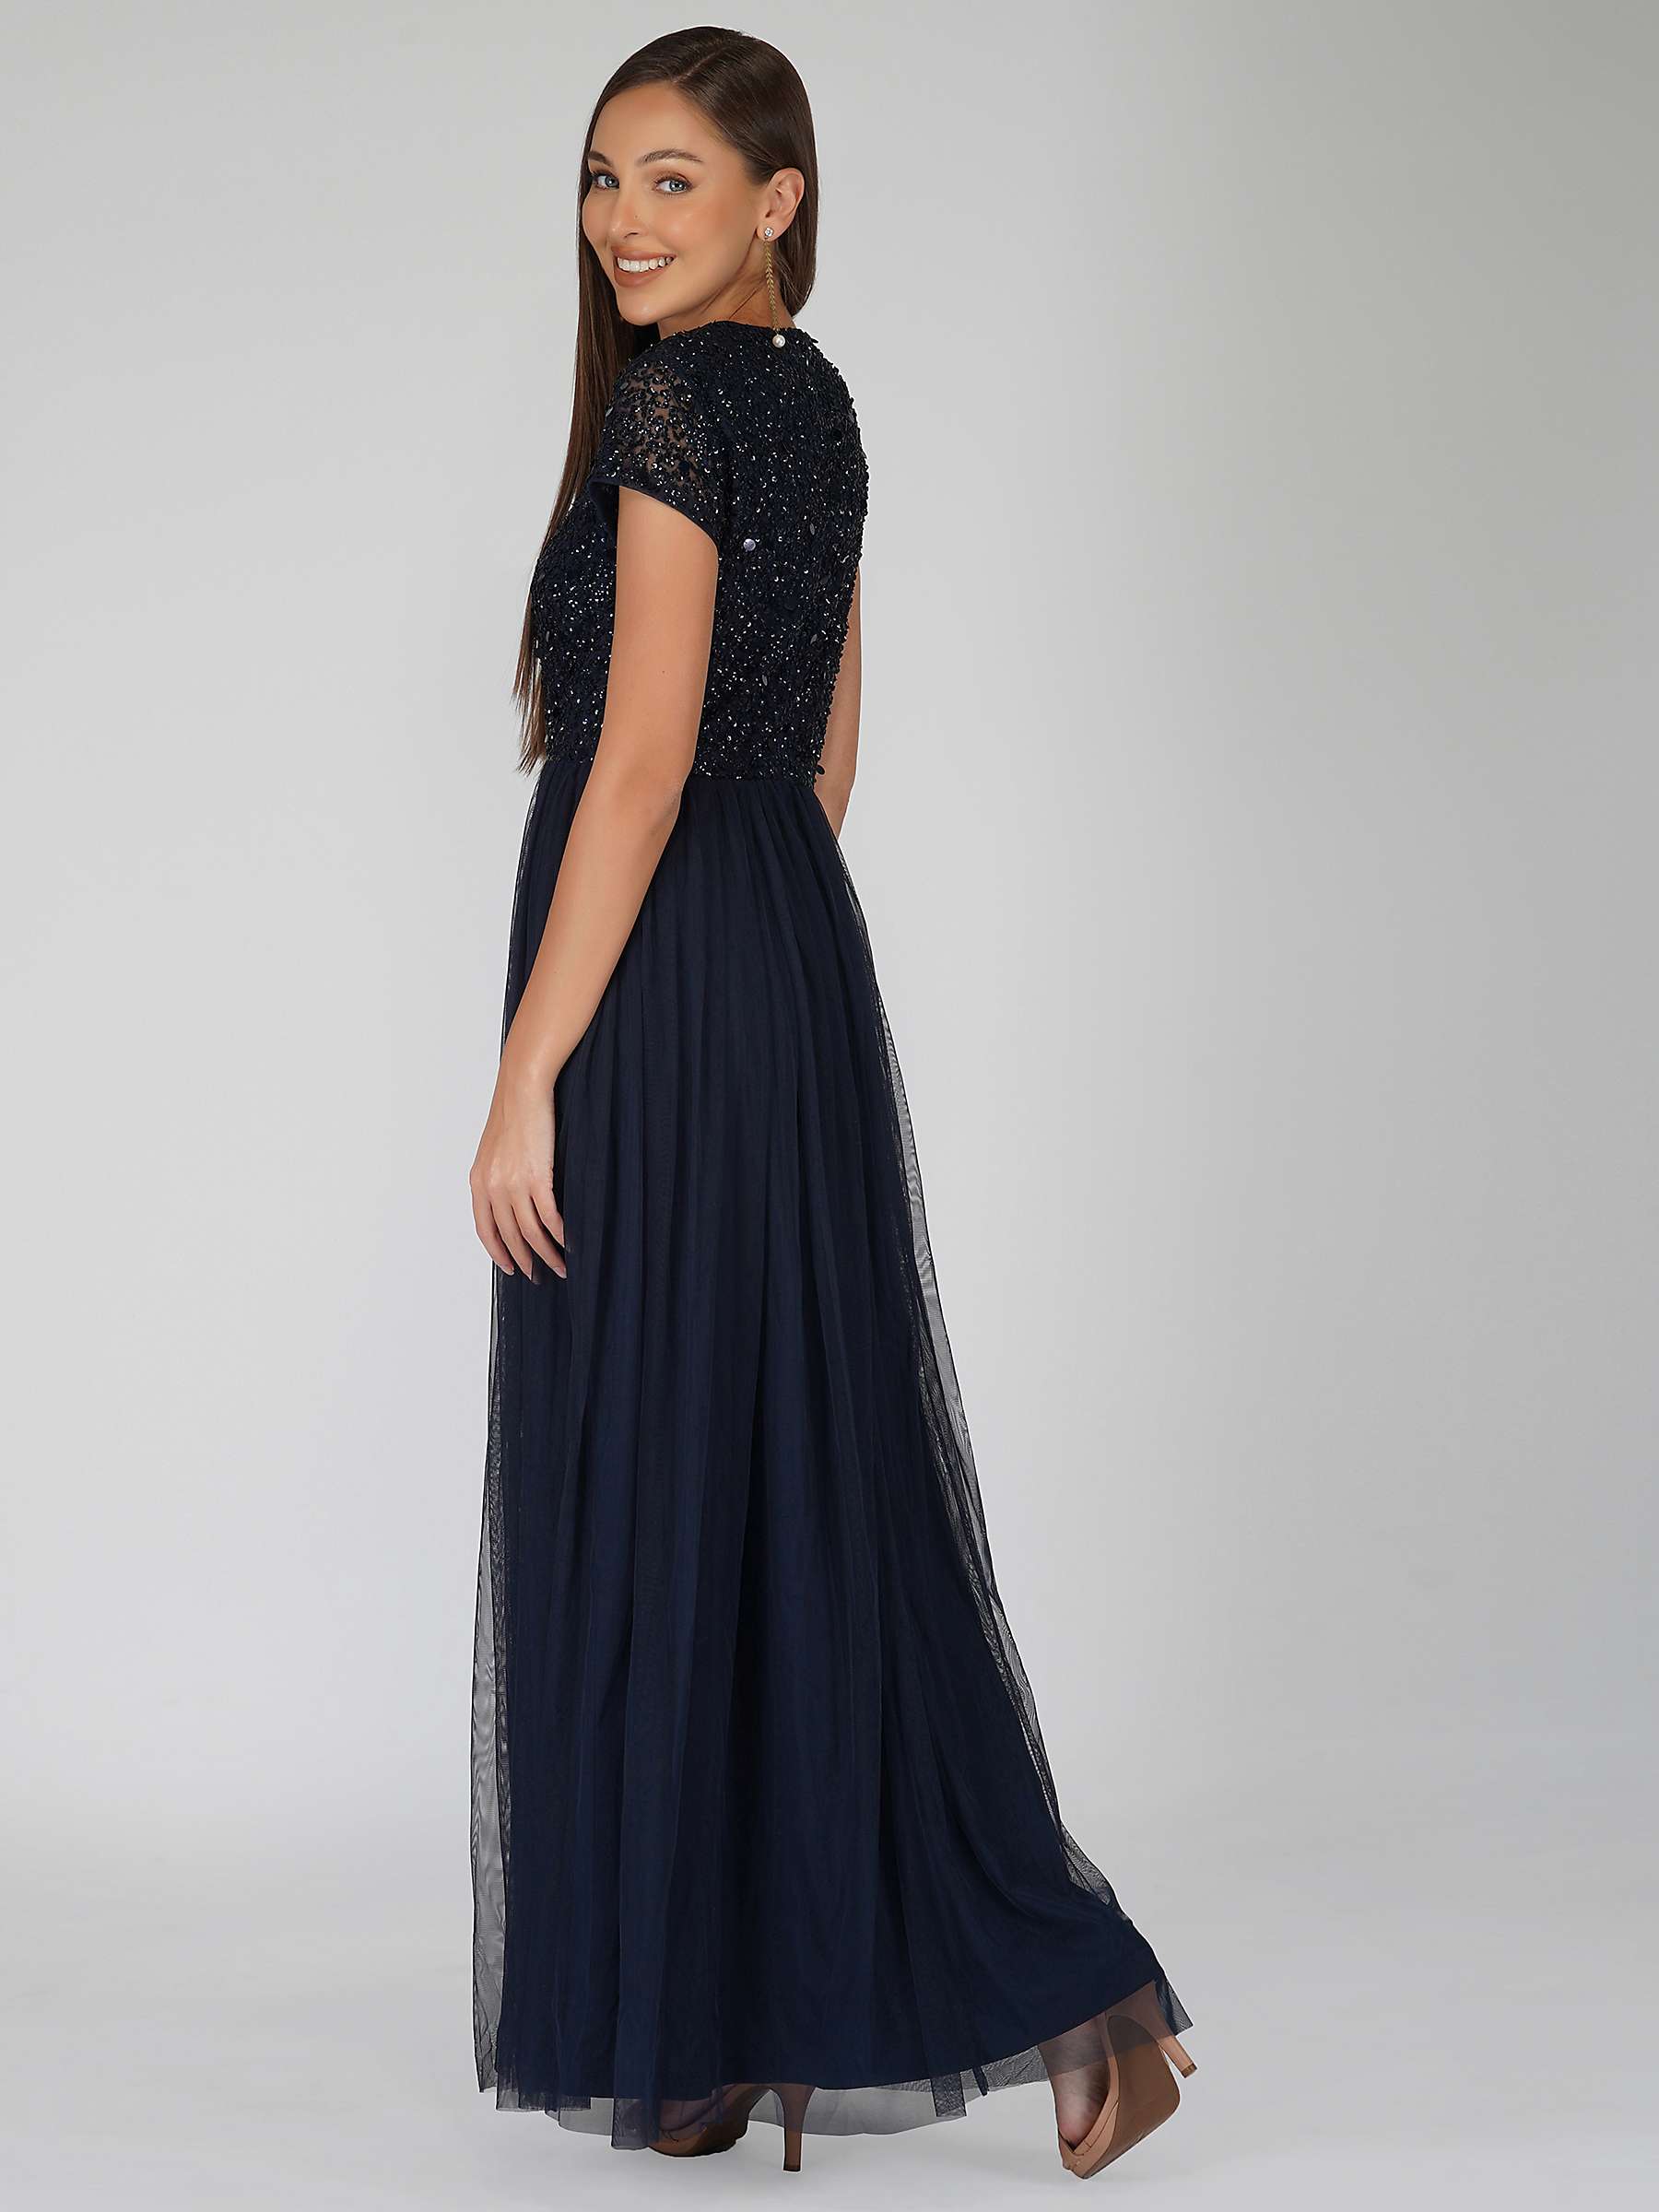 Buy Lace & Beads Picasso Embellished Bodice Maxi Dress Online at johnlewis.com